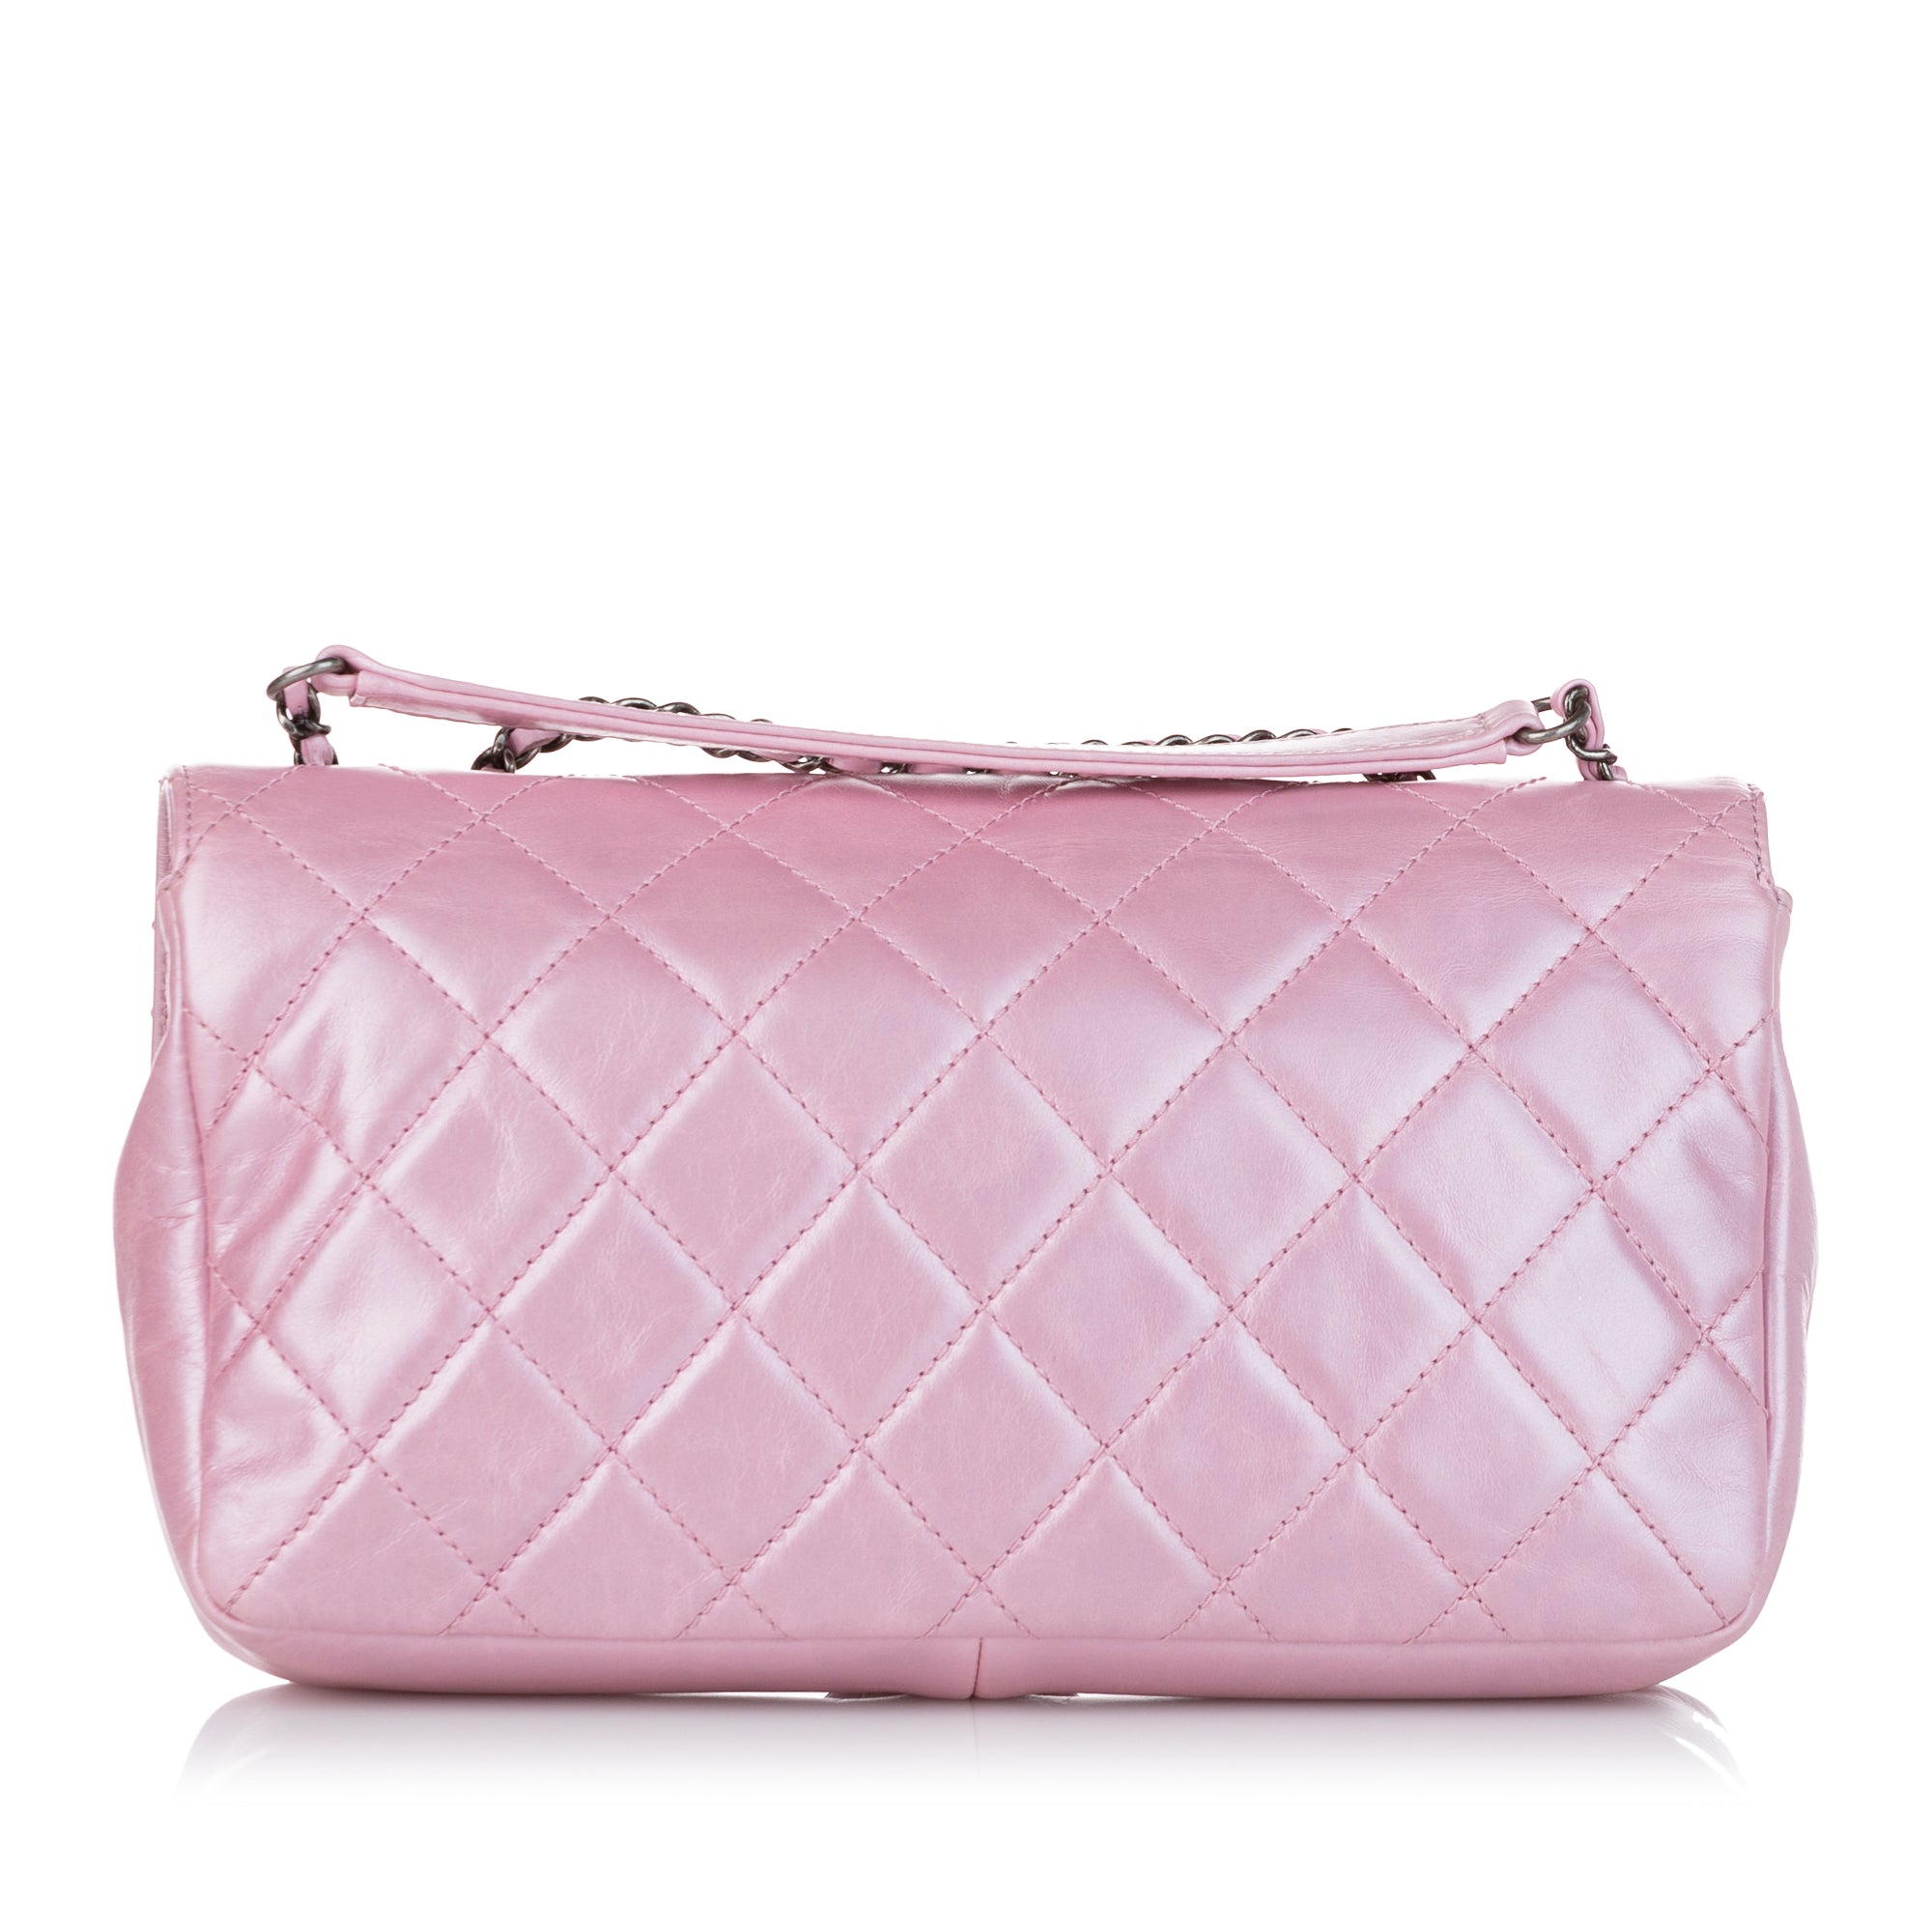 Preloved CHANEL Timeless Pink Quilted Lambskin Medium Single Flap